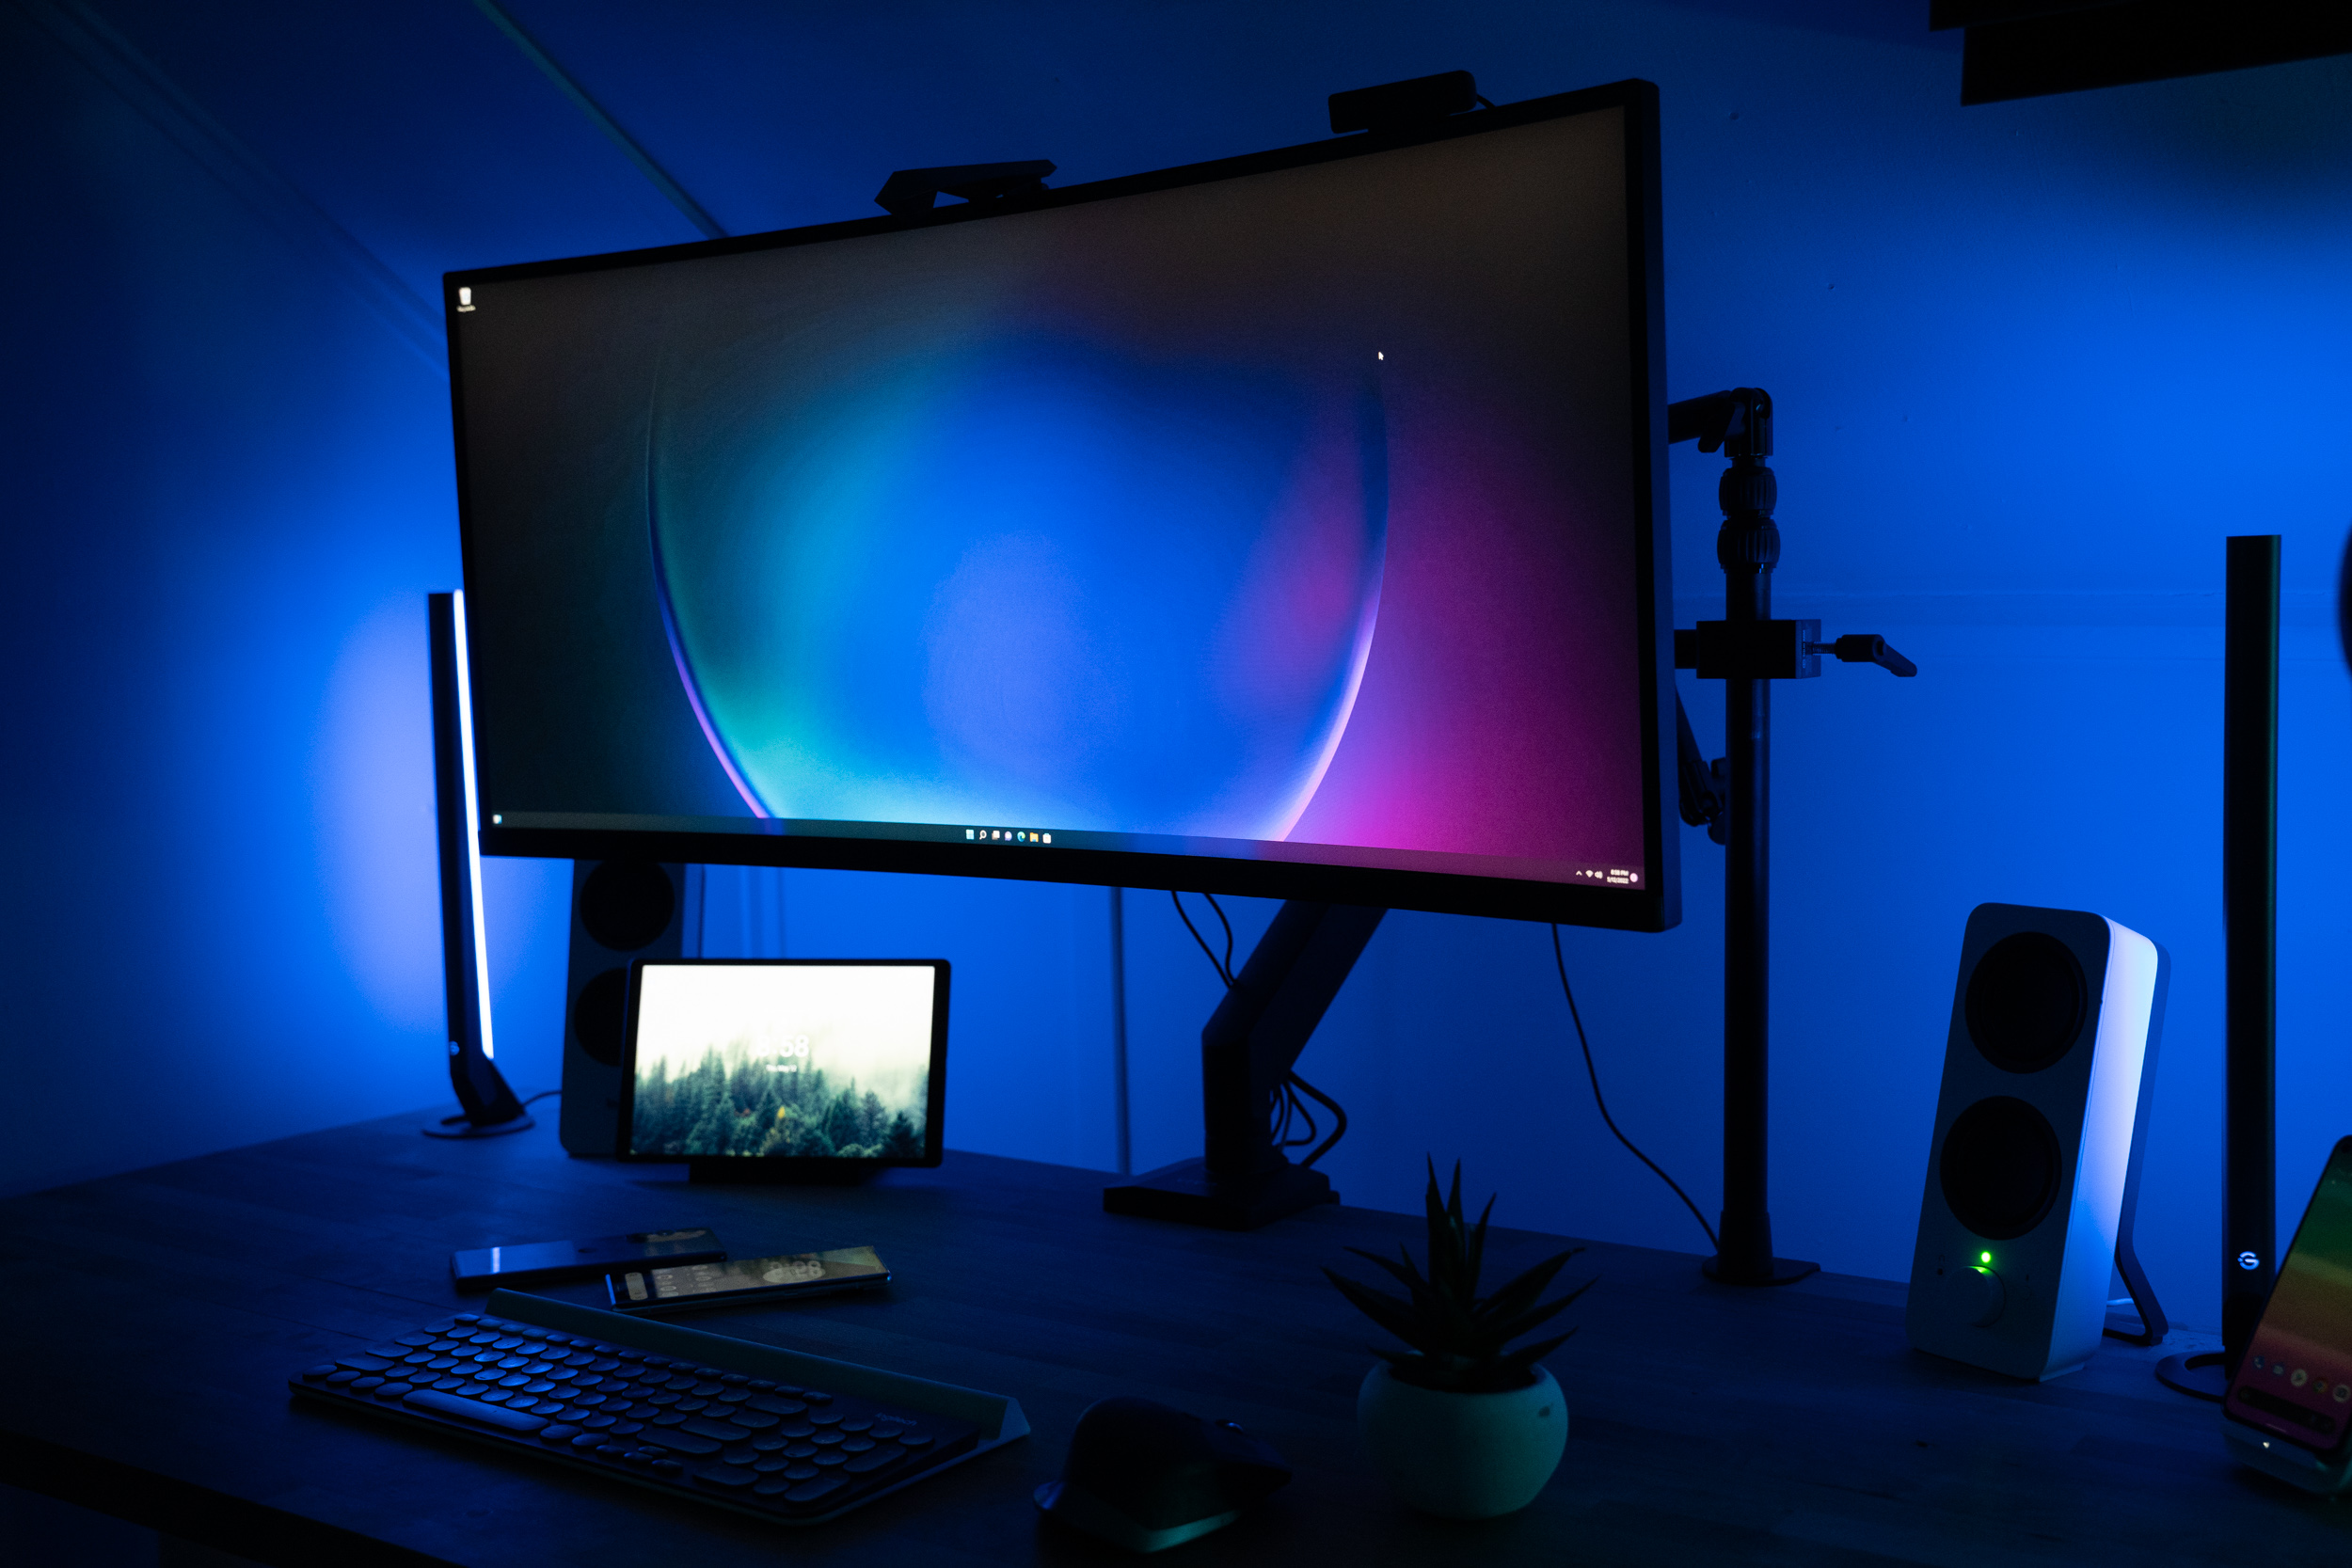 Level up your gaming setup with Govee’s DreamView G1 Pro gaming lights – Phandroid govee DreamView G1 Pro 4 1